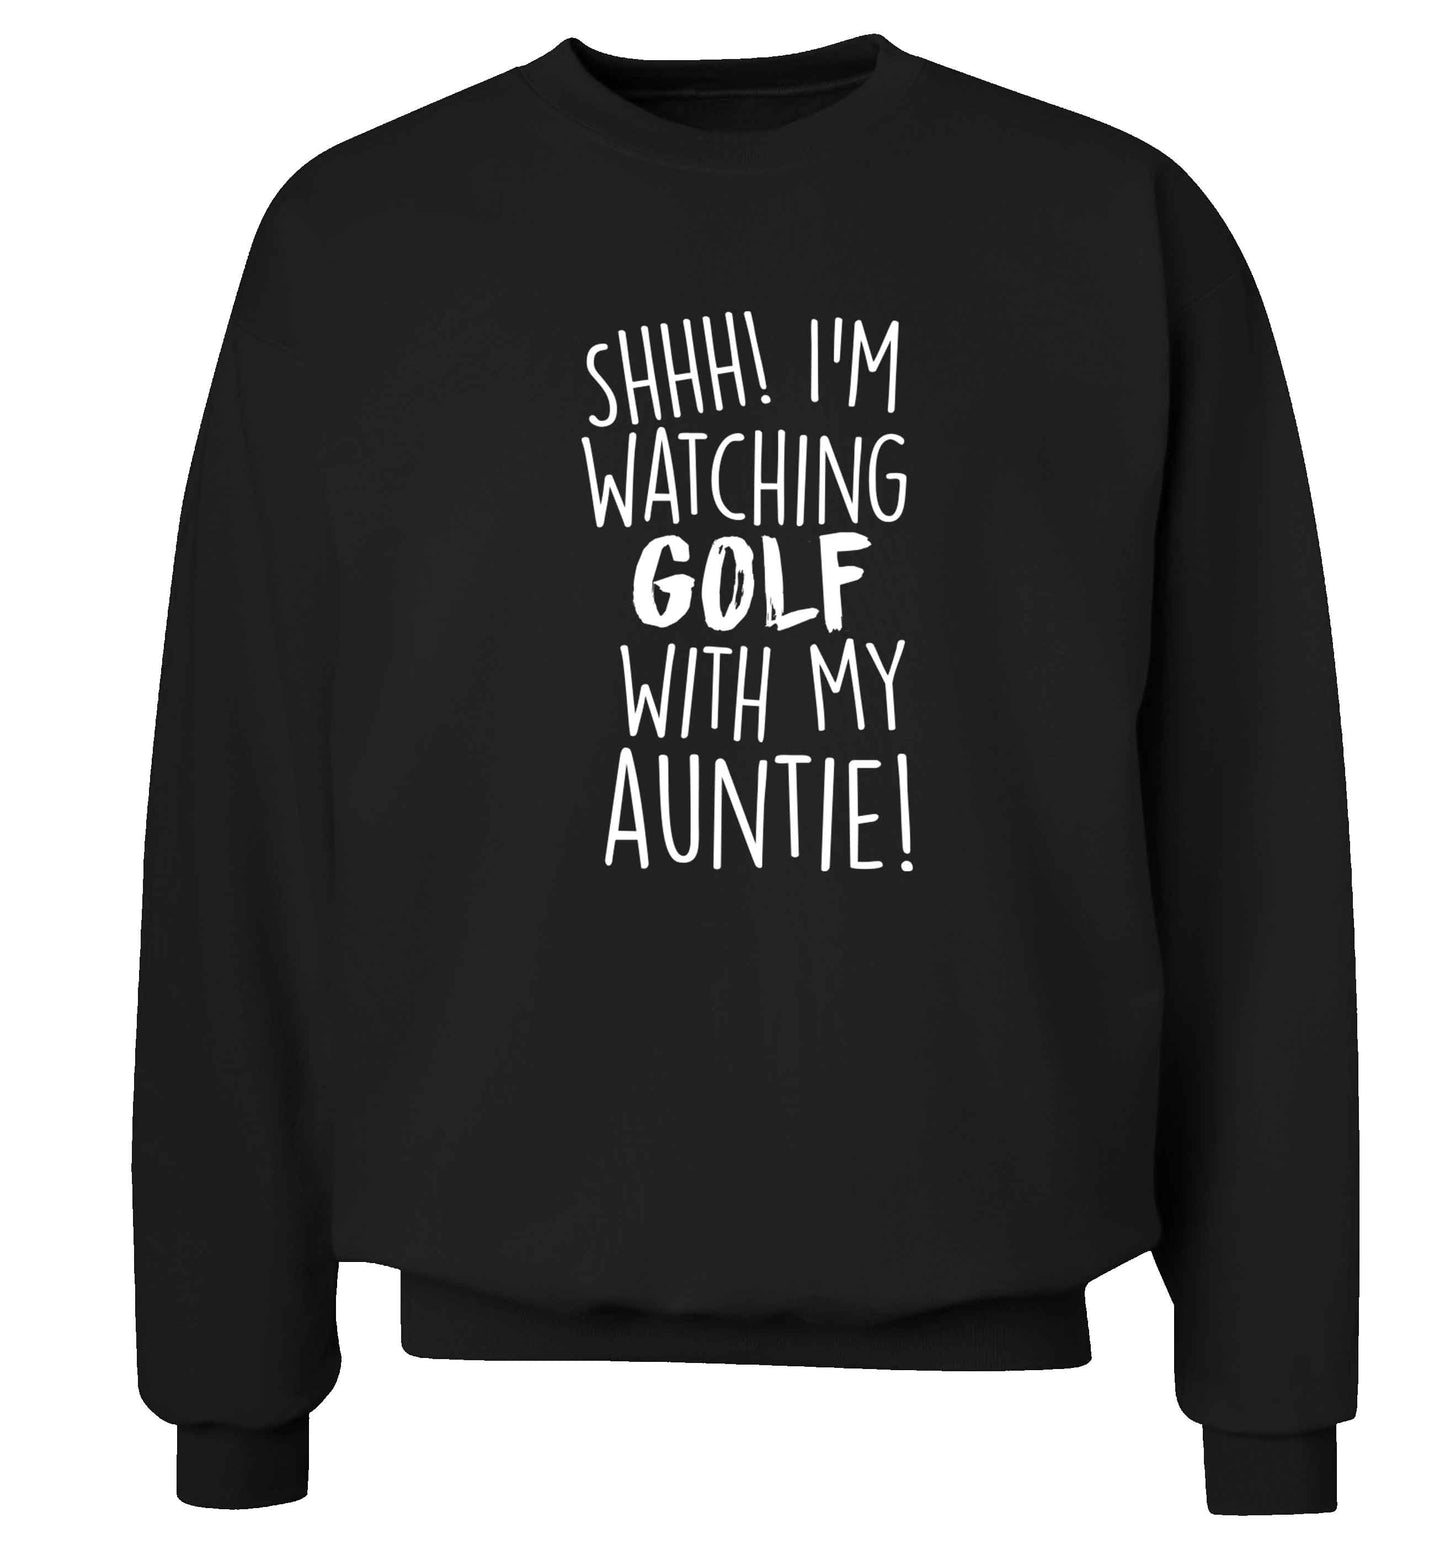 Shh I'm watching golf with my auntie Adult's unisex black Sweater 2XL